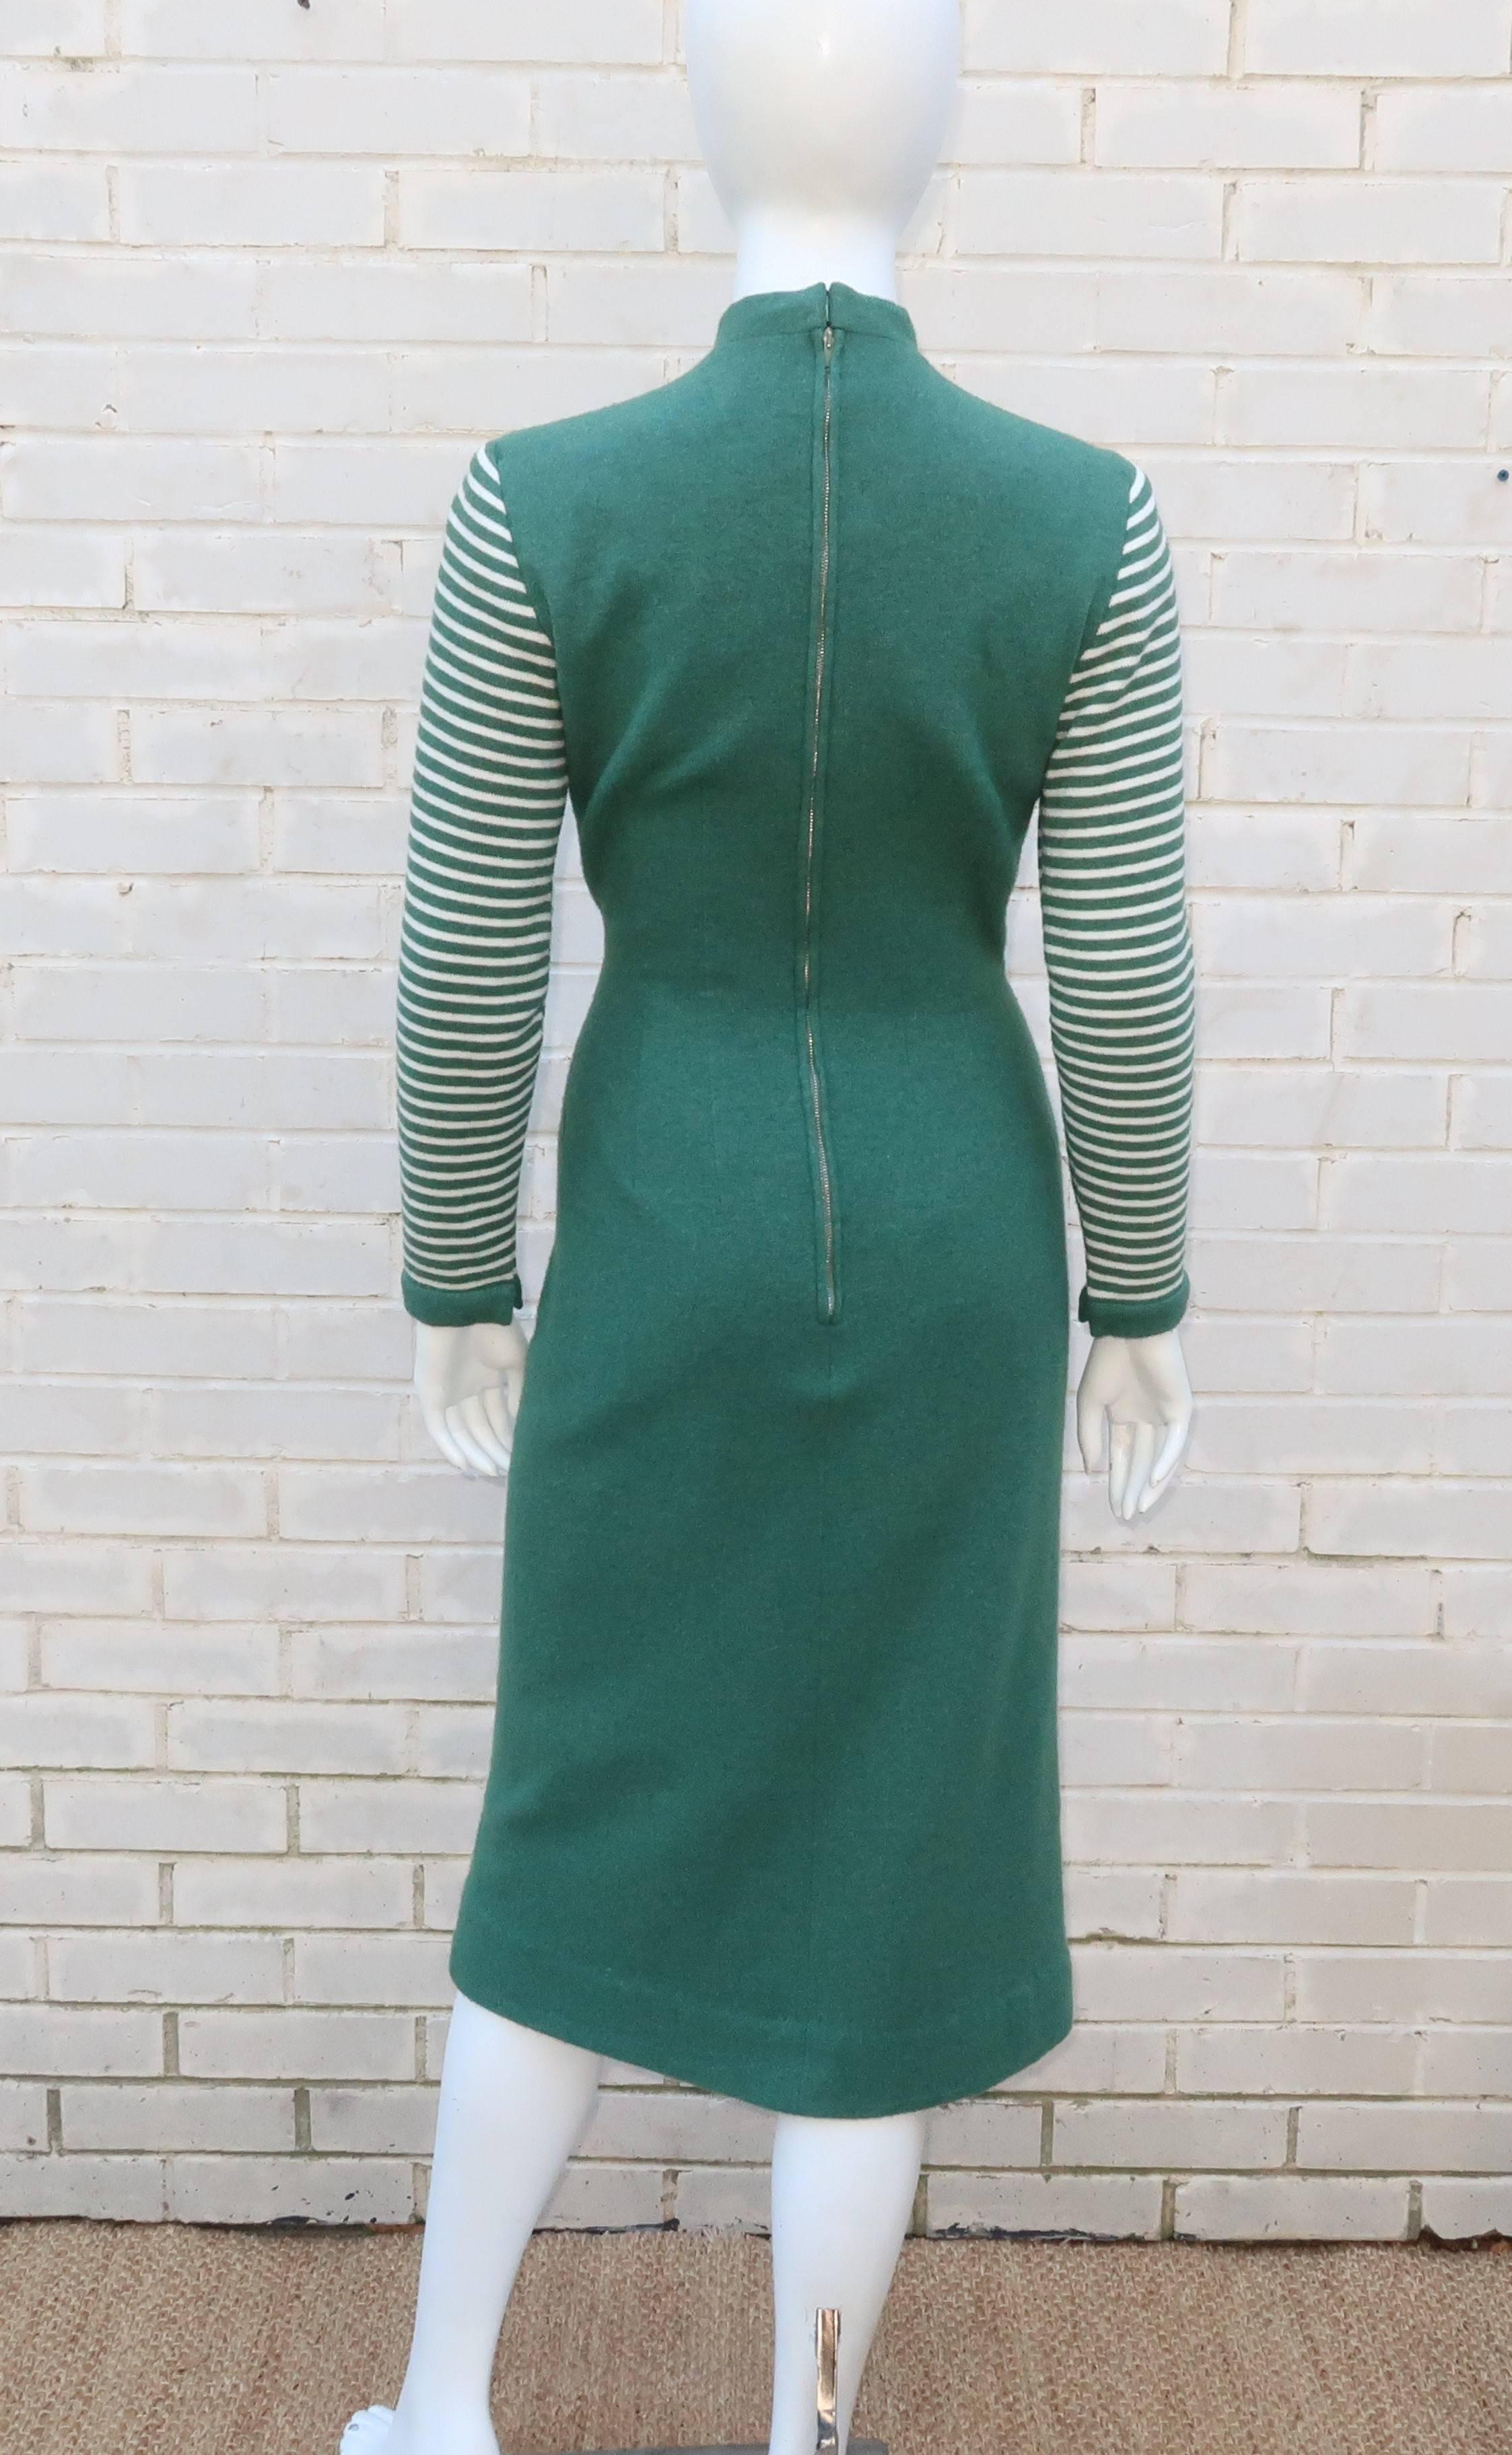 Adorable 1950's Anne Fogarty Green & White Wool Sweater Dress 1